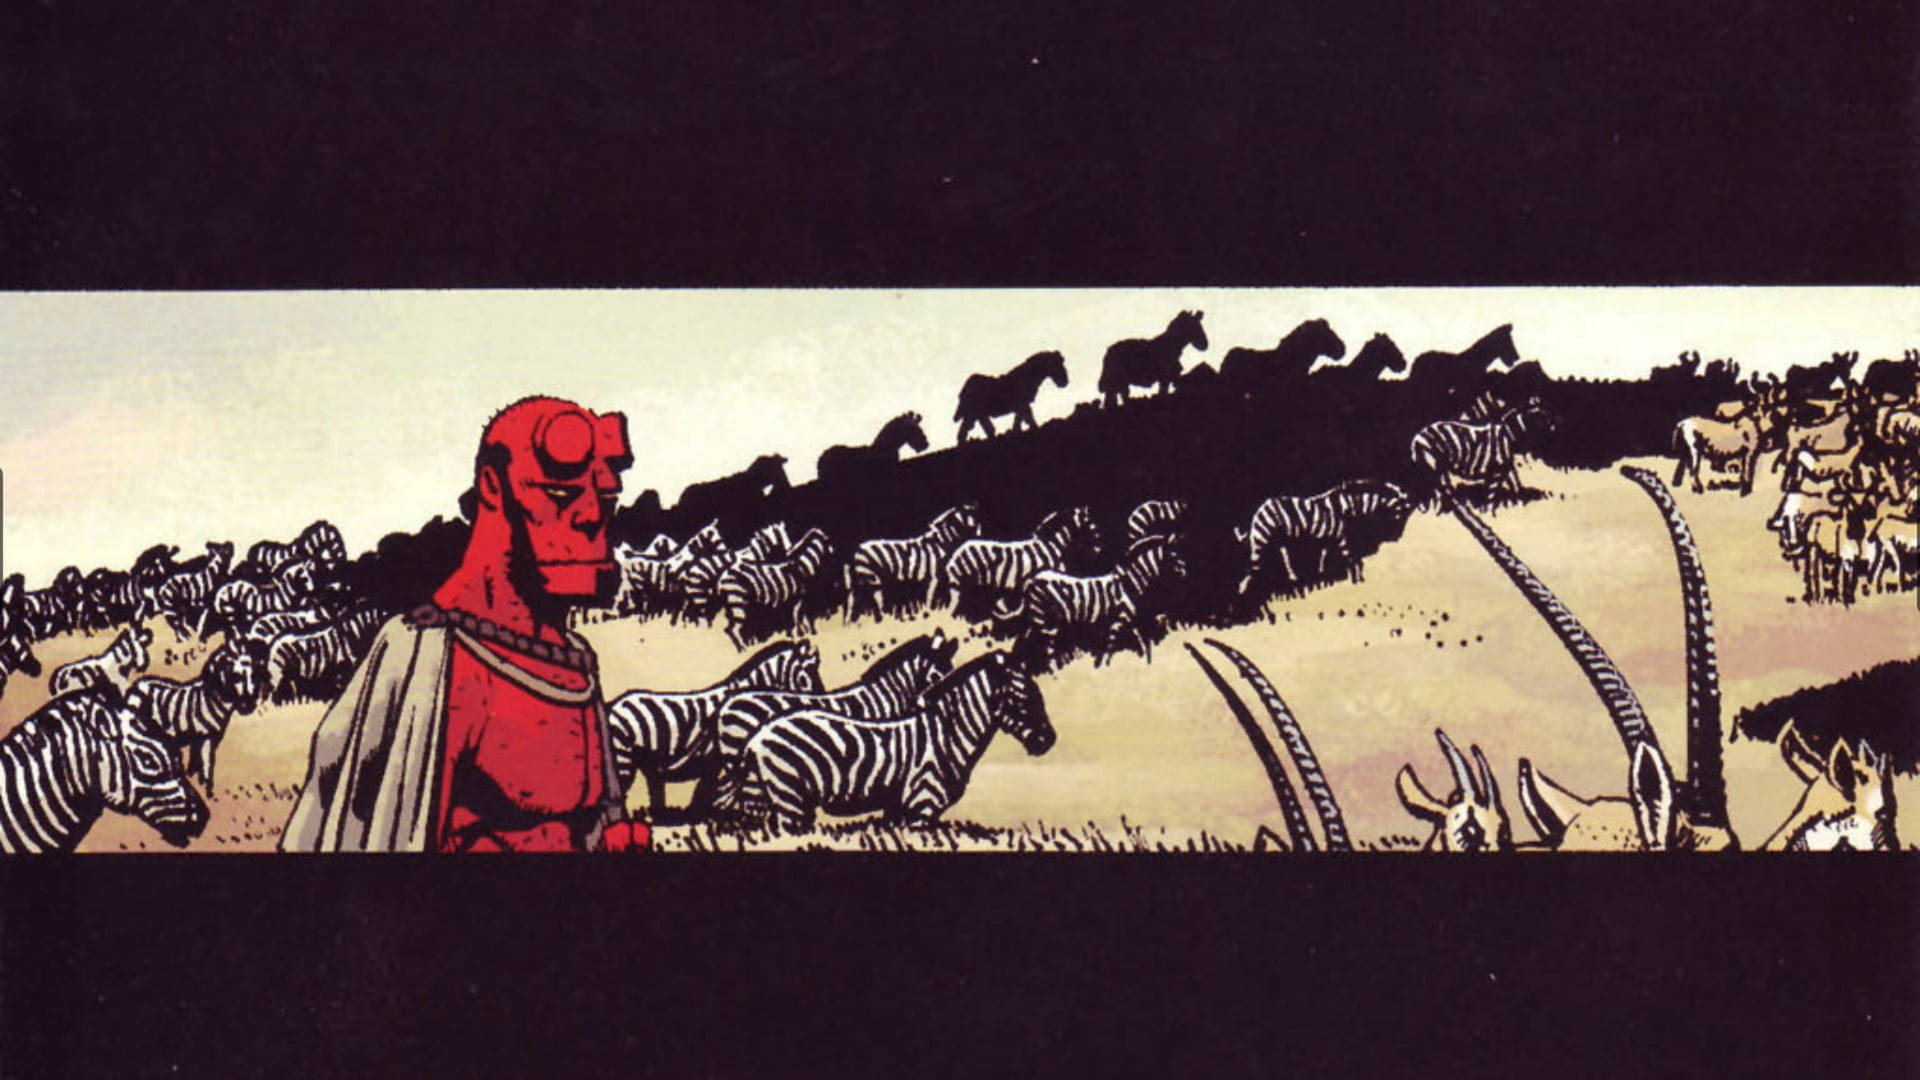 Hellboy With Group Of Zebras